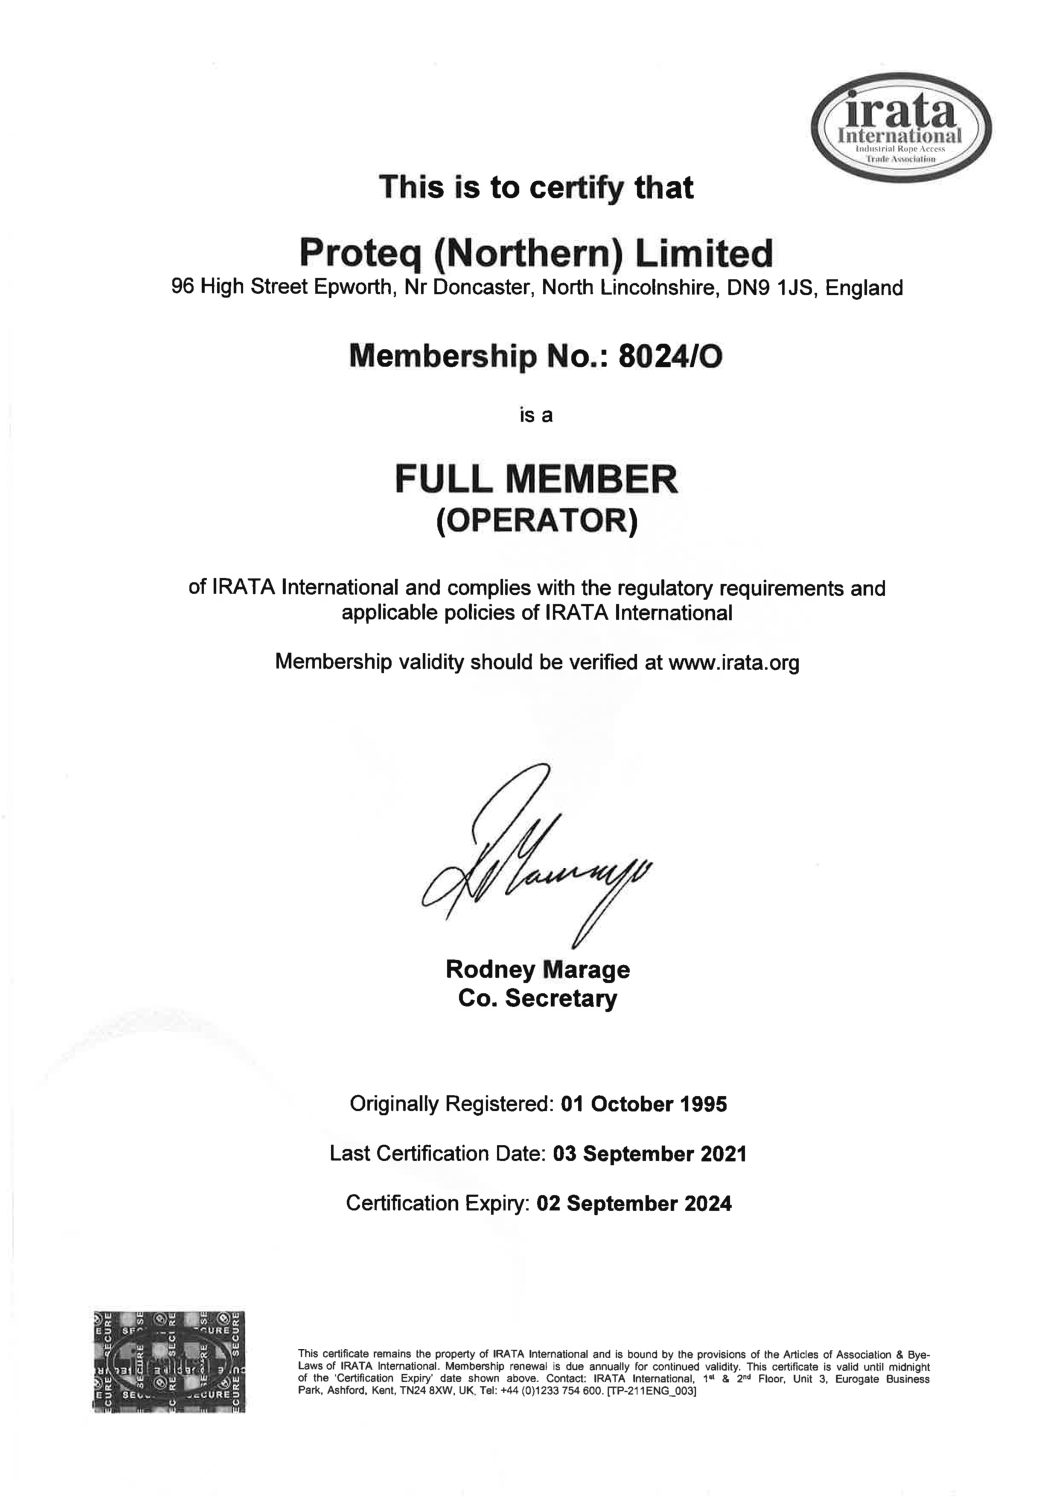 Proteq Passes IRATA Audit with Flying Colours